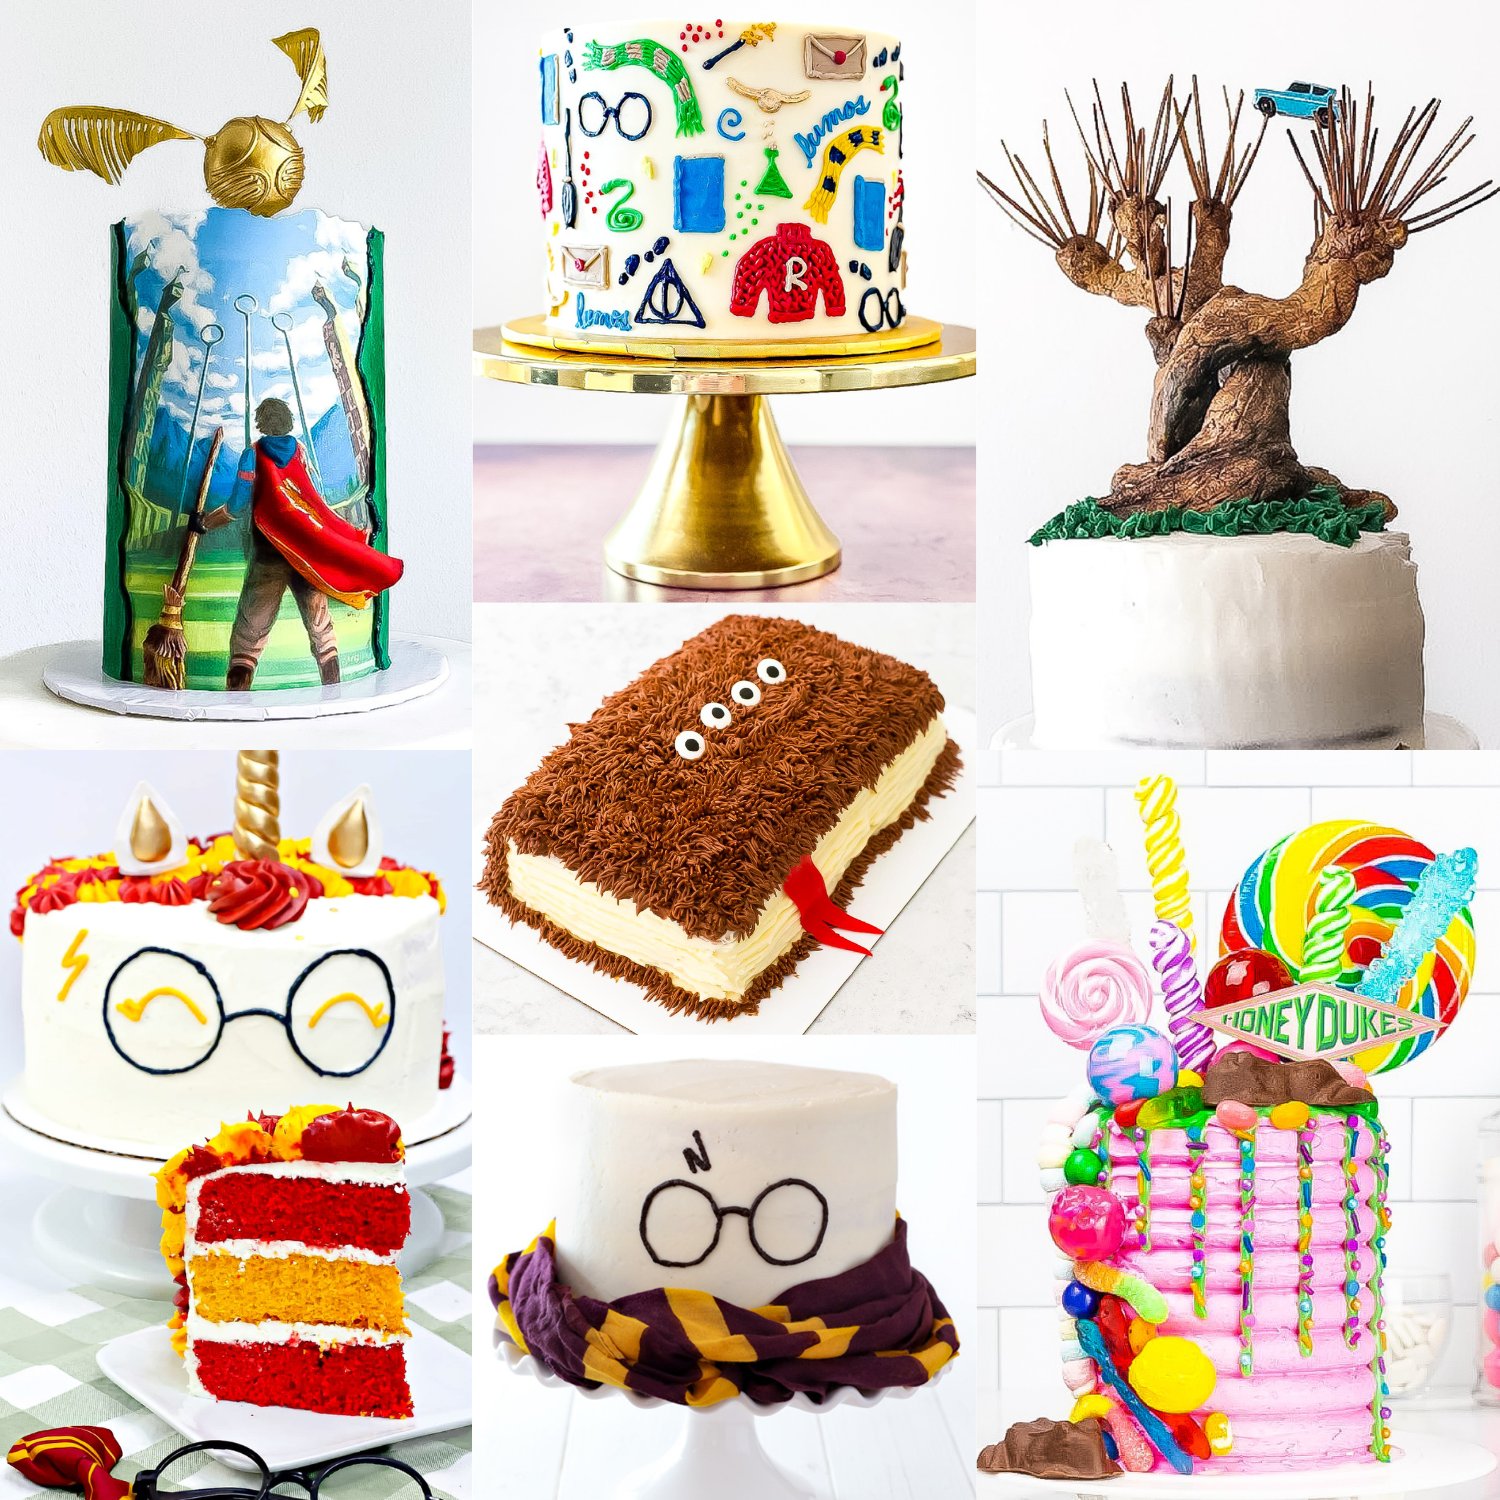 Harry Potter cake collage